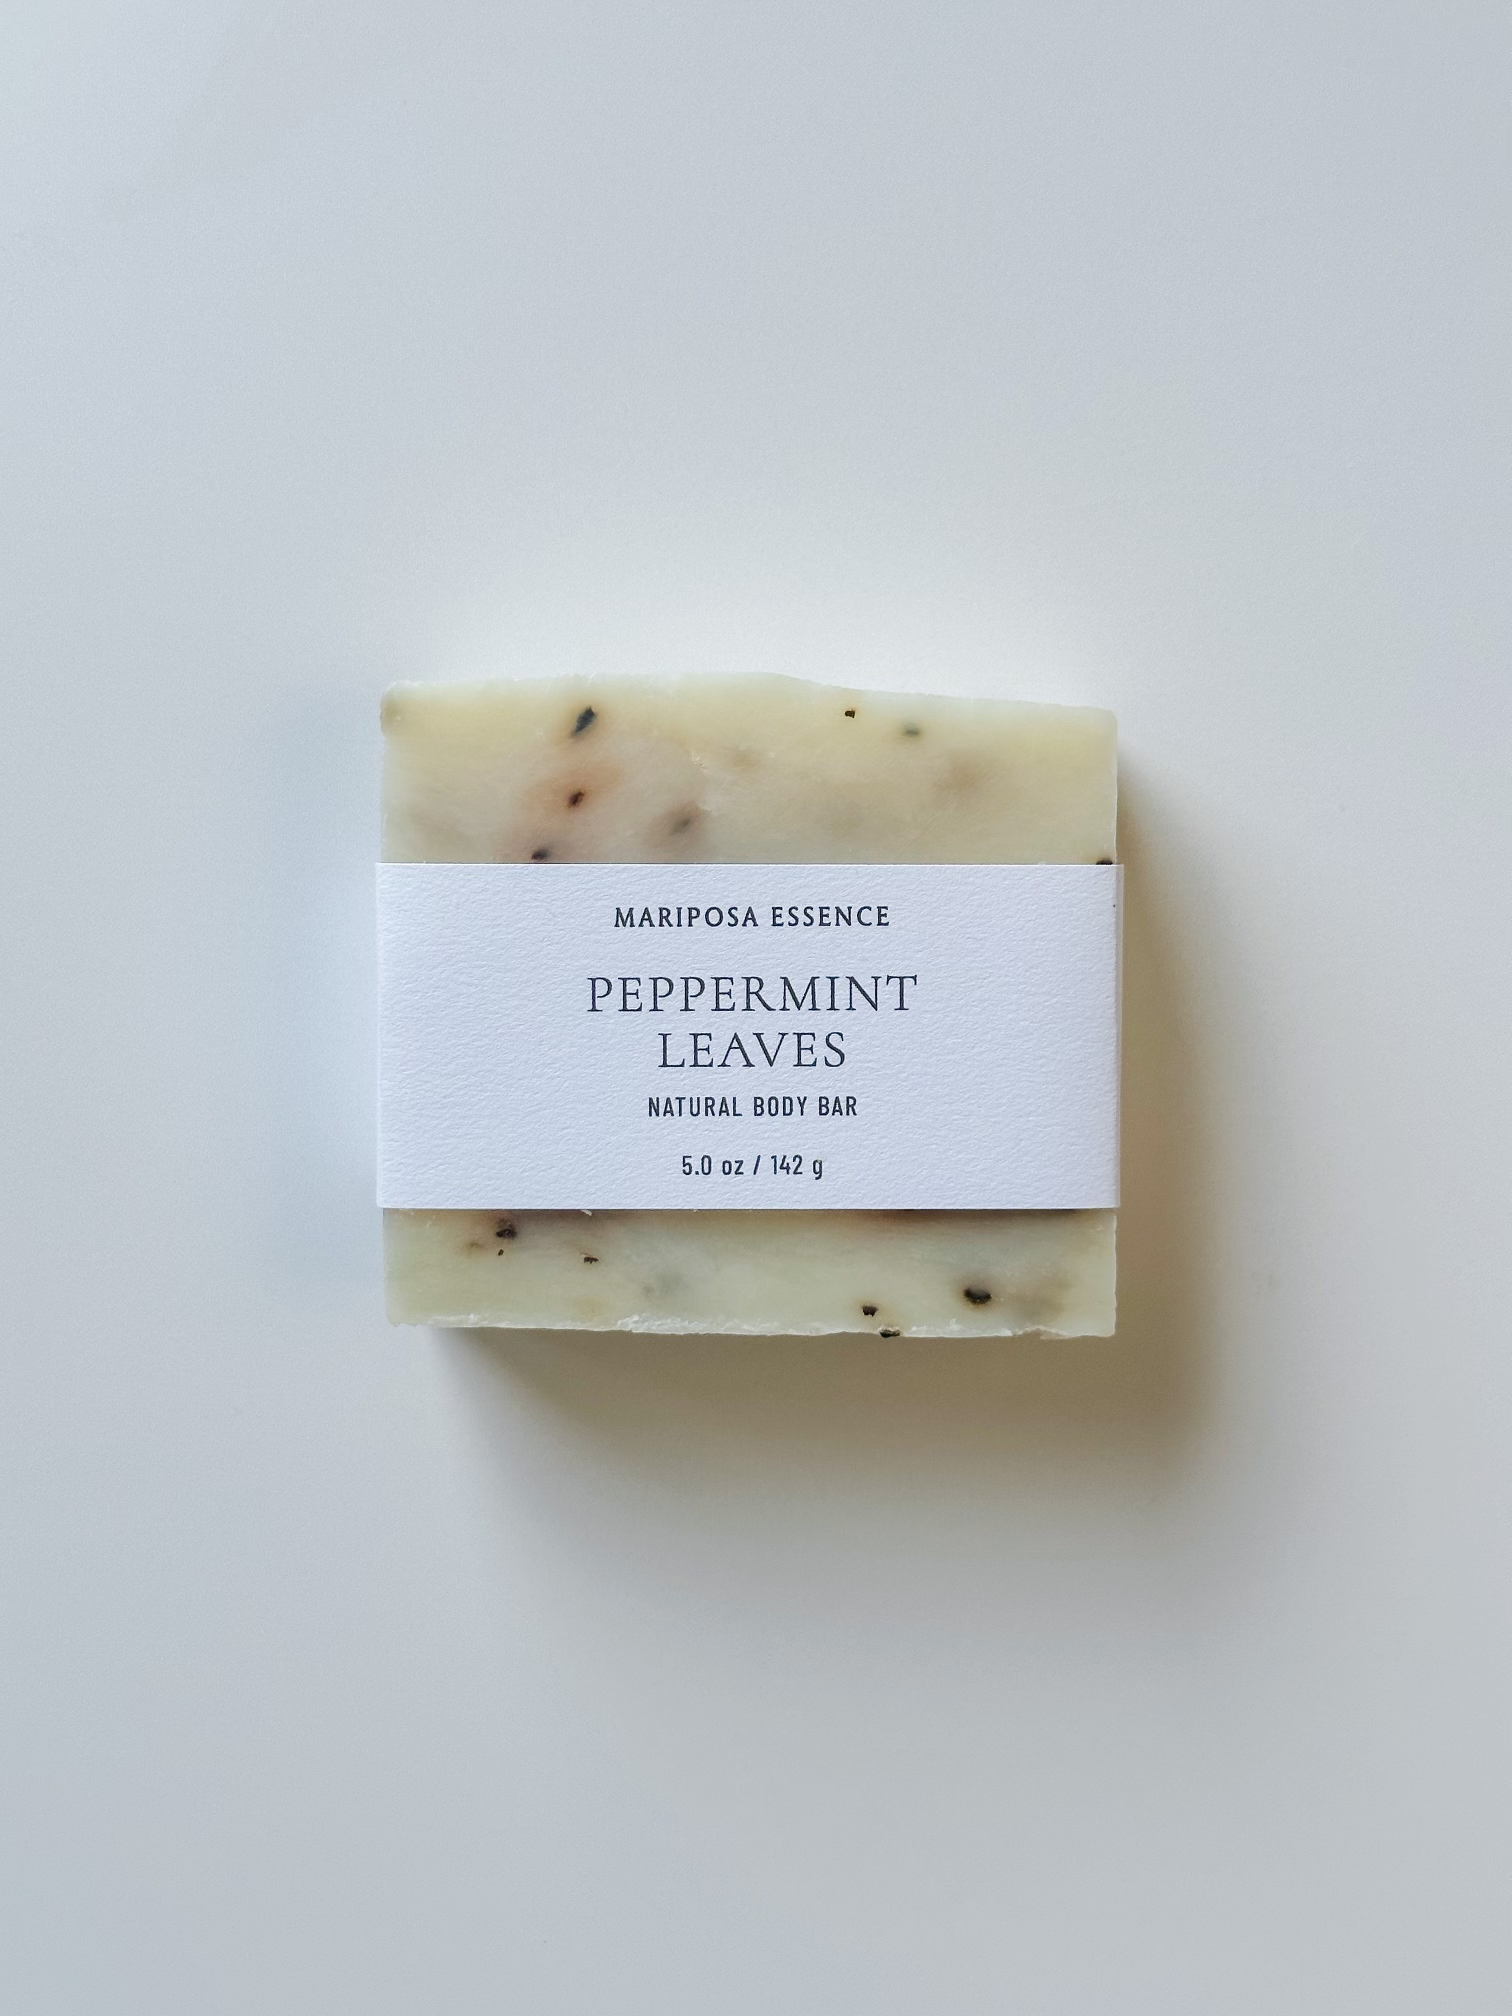 Peppermint Leaves body bar with crushed peppermint leaves